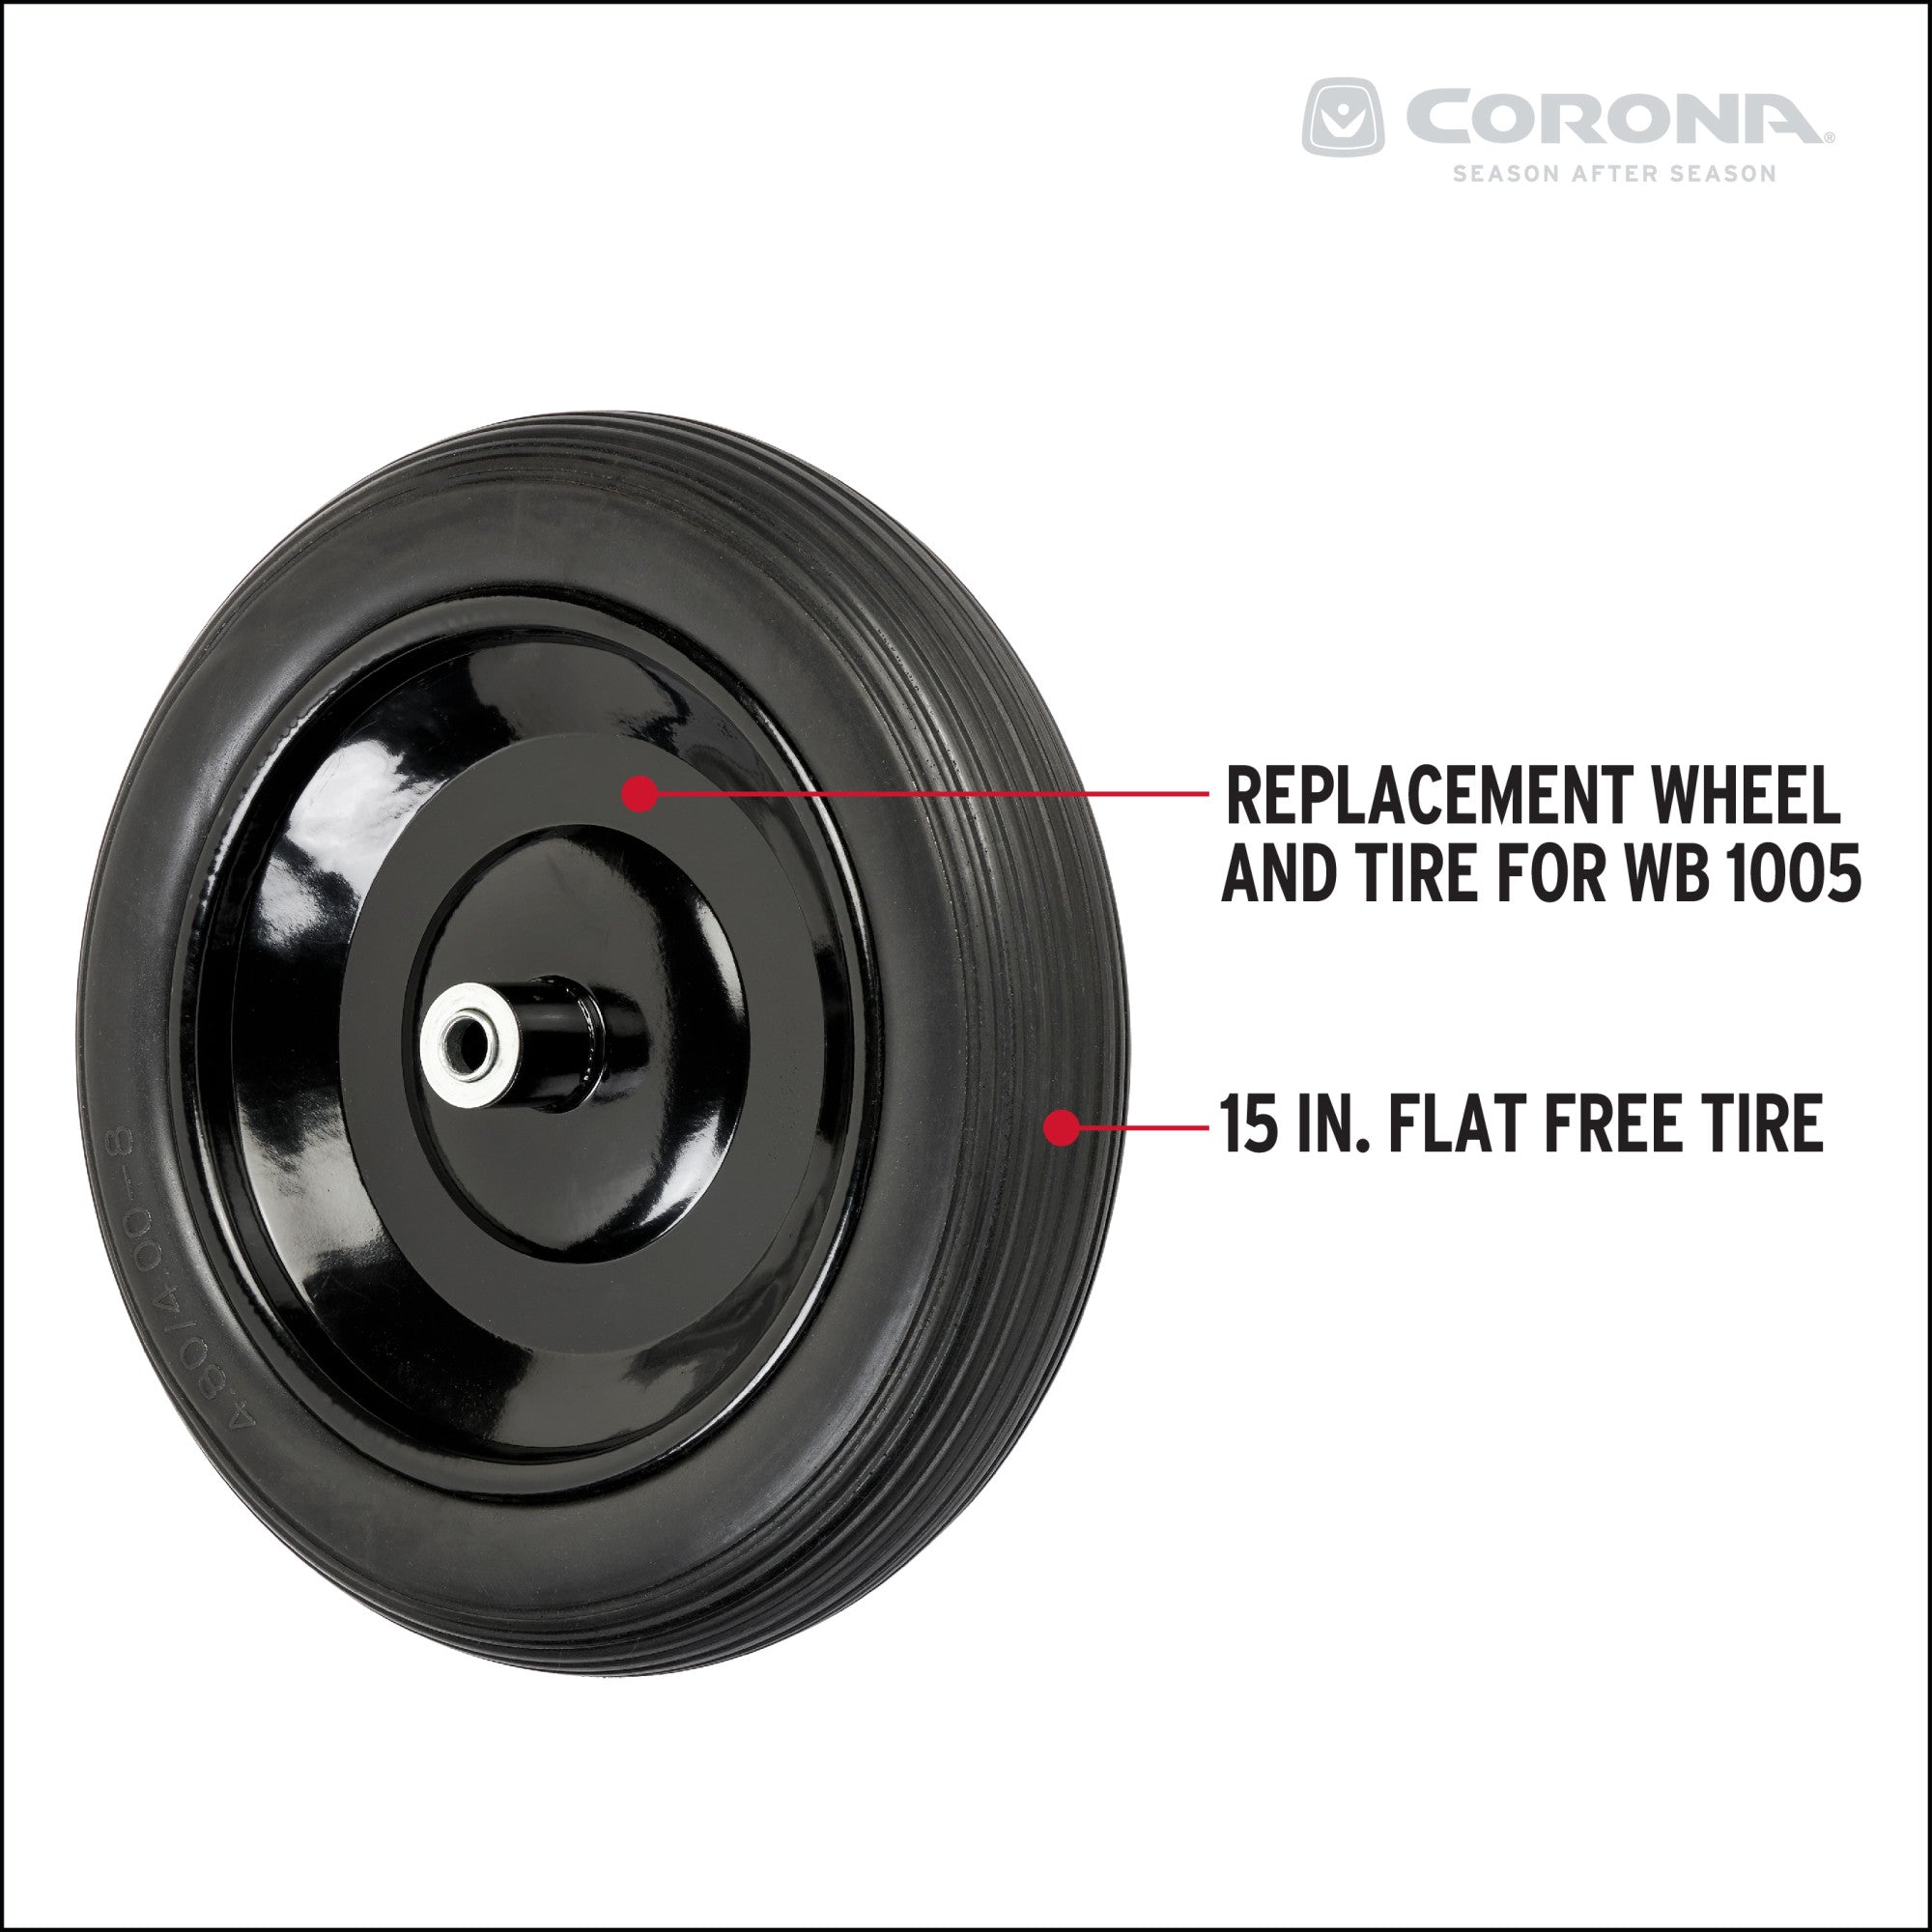 WB 1000 Replacement Wheel and Tire